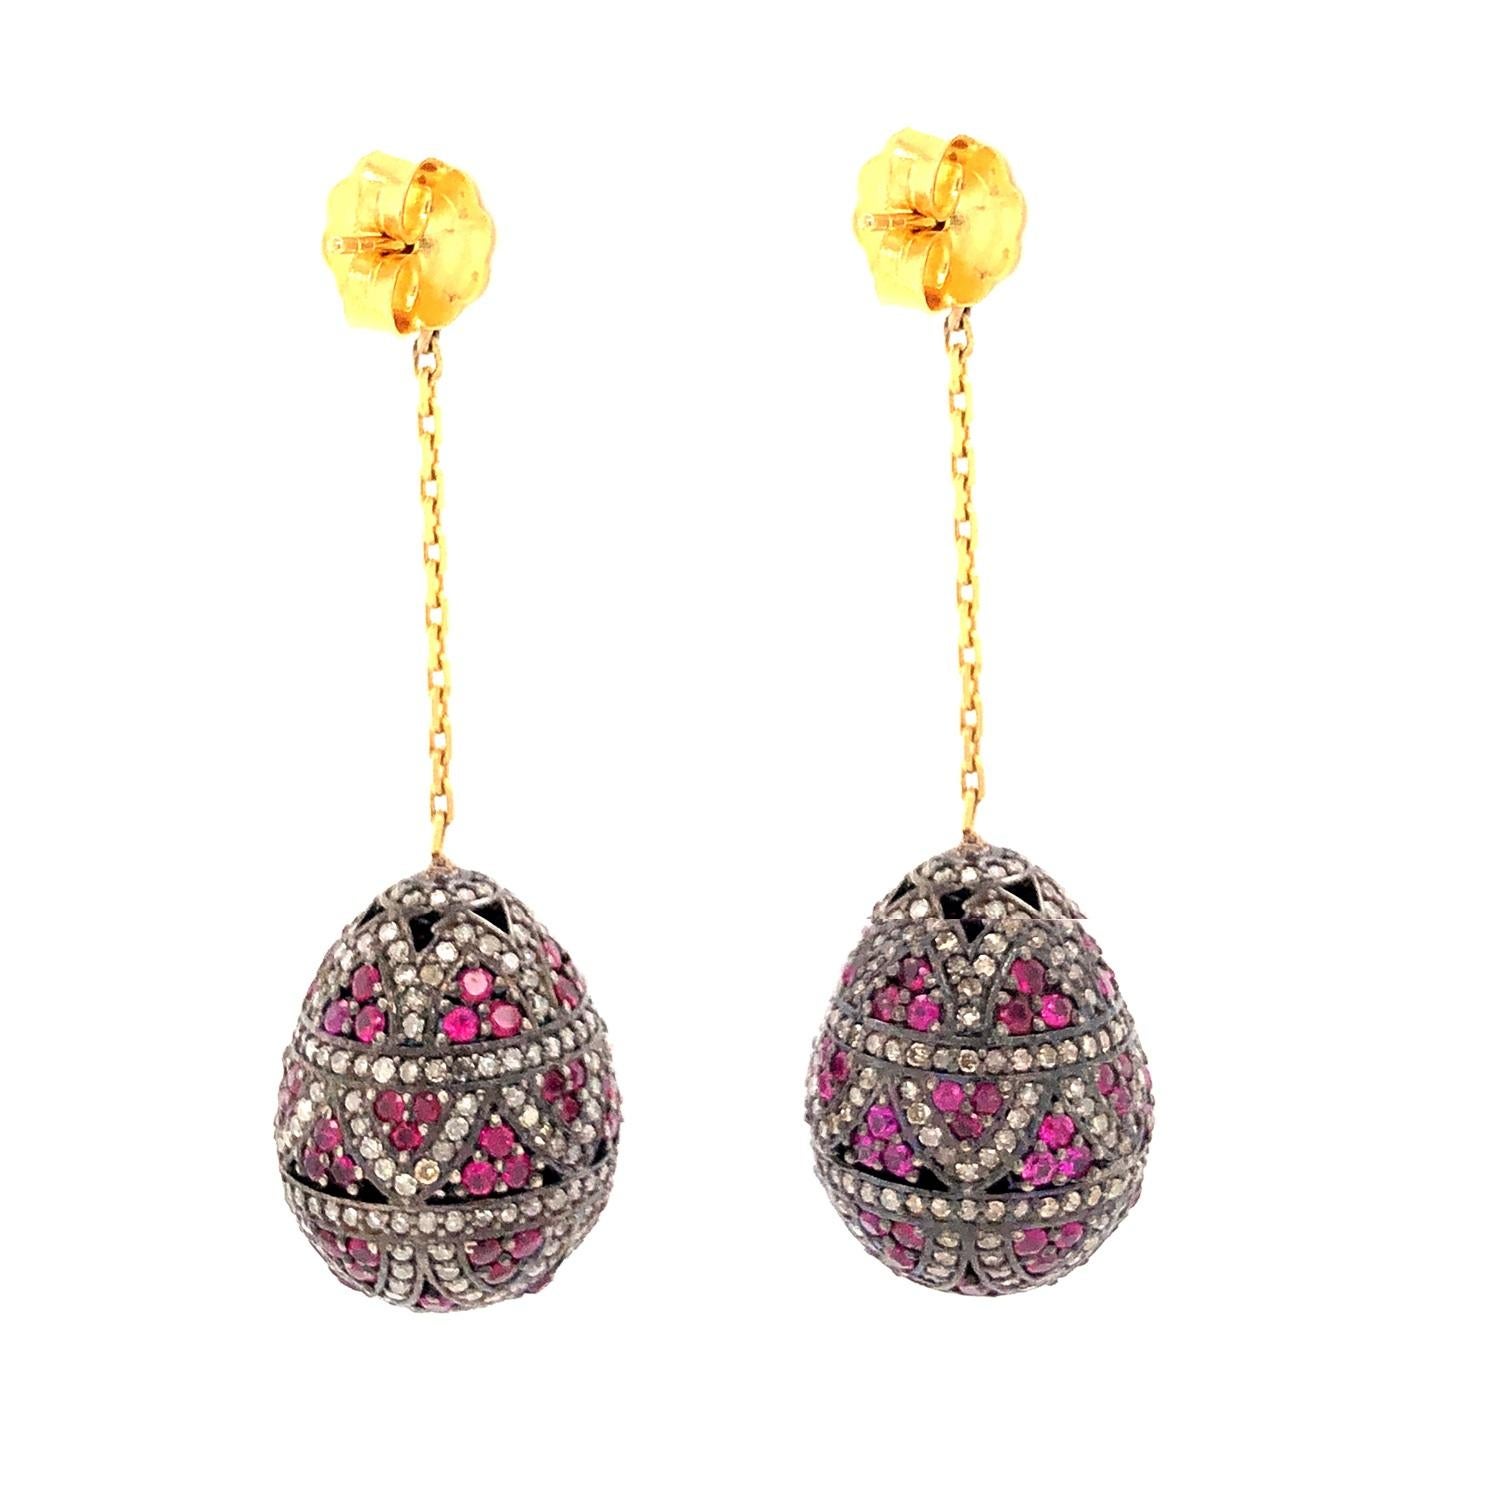 Ruby & Pave Diamond Ball Earrings Made in 18k Gold & Silver In New Condition For Sale In New York, NY